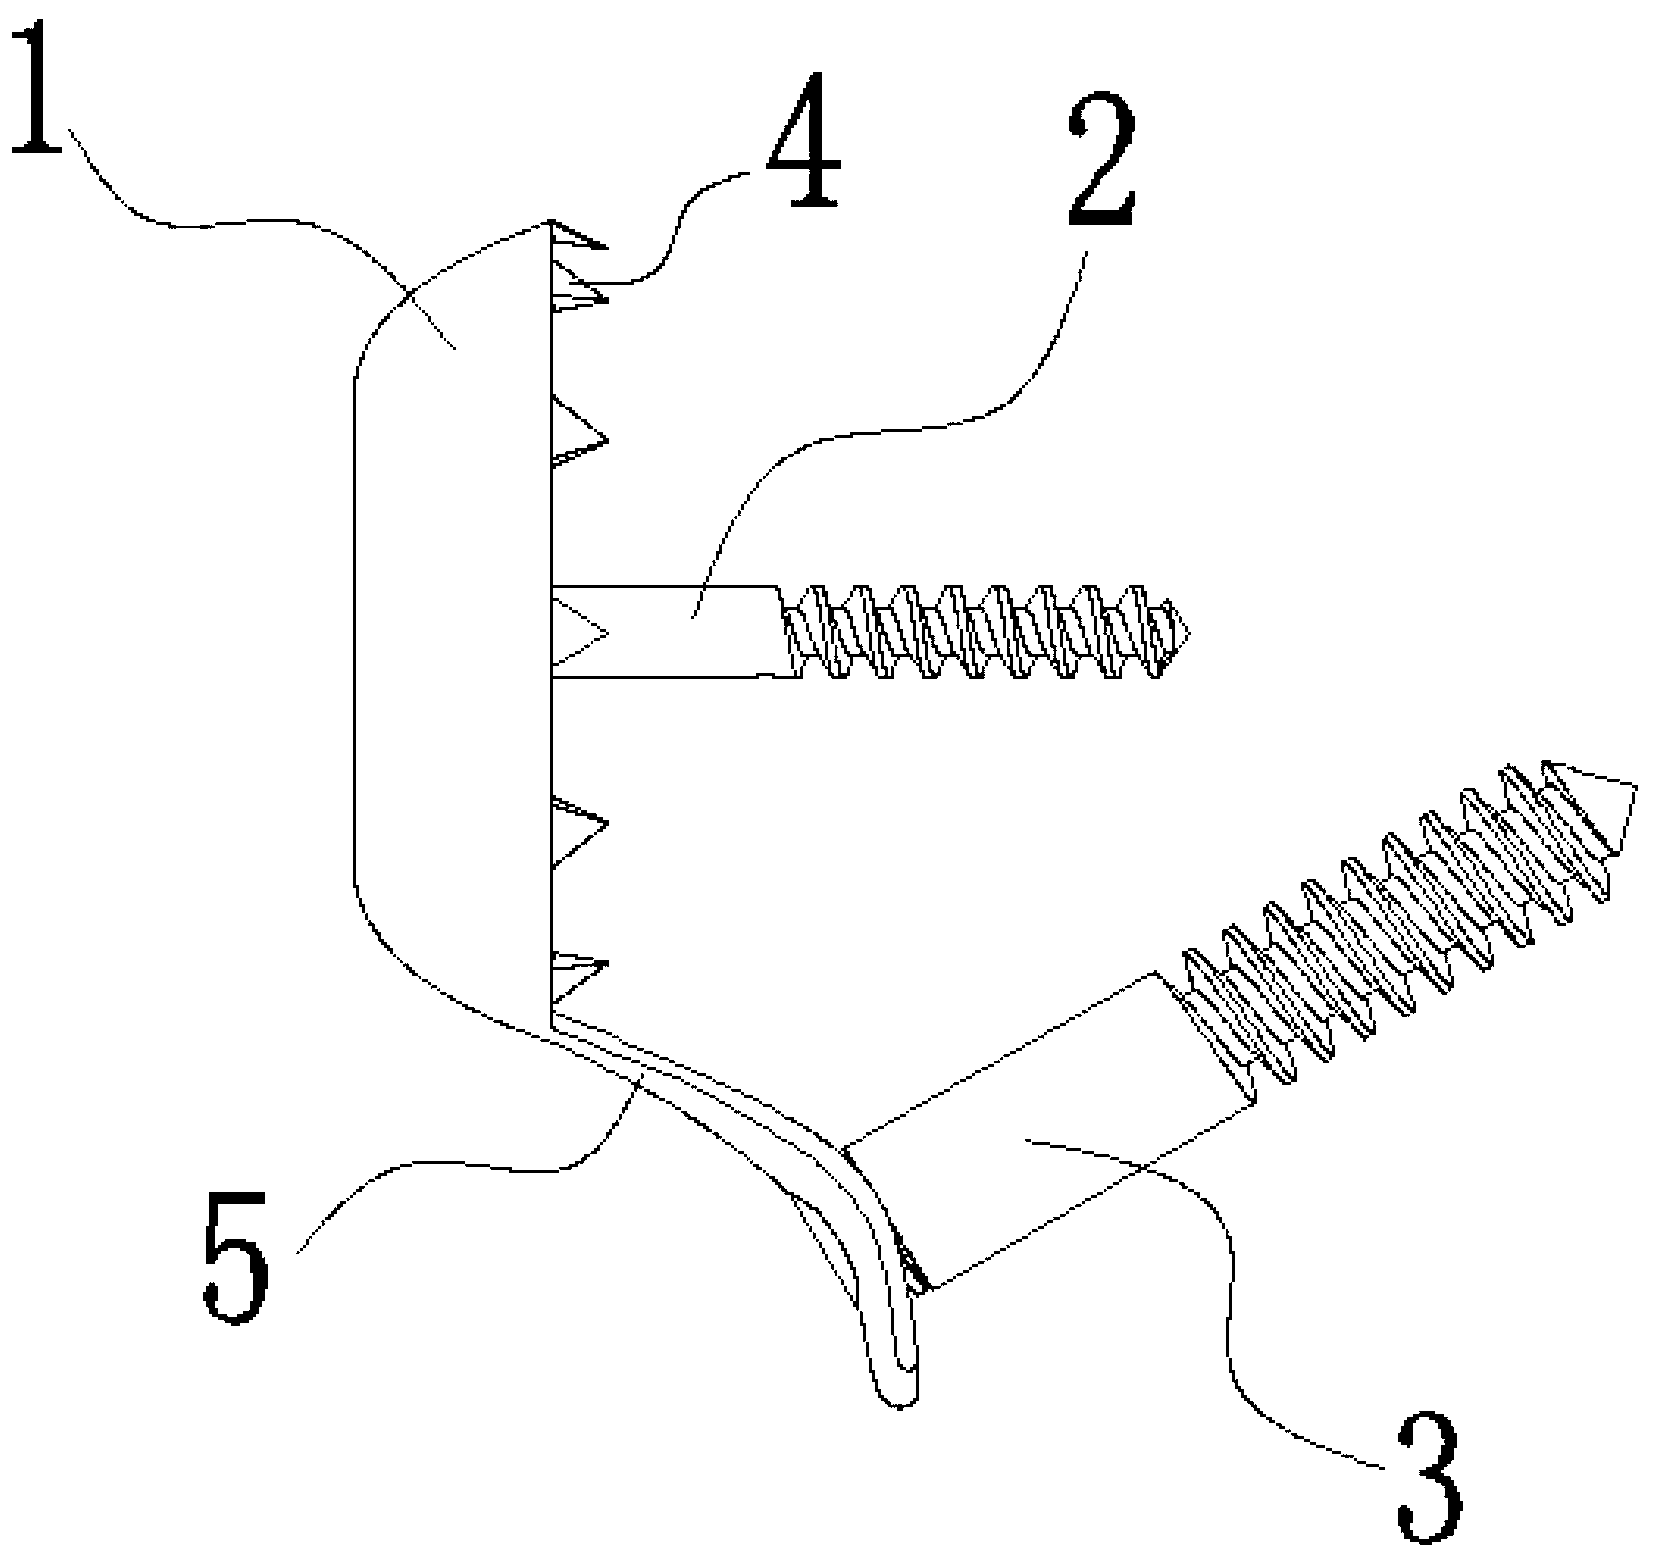 Novel toothed screw pad assembly for cure of avulsion fracture